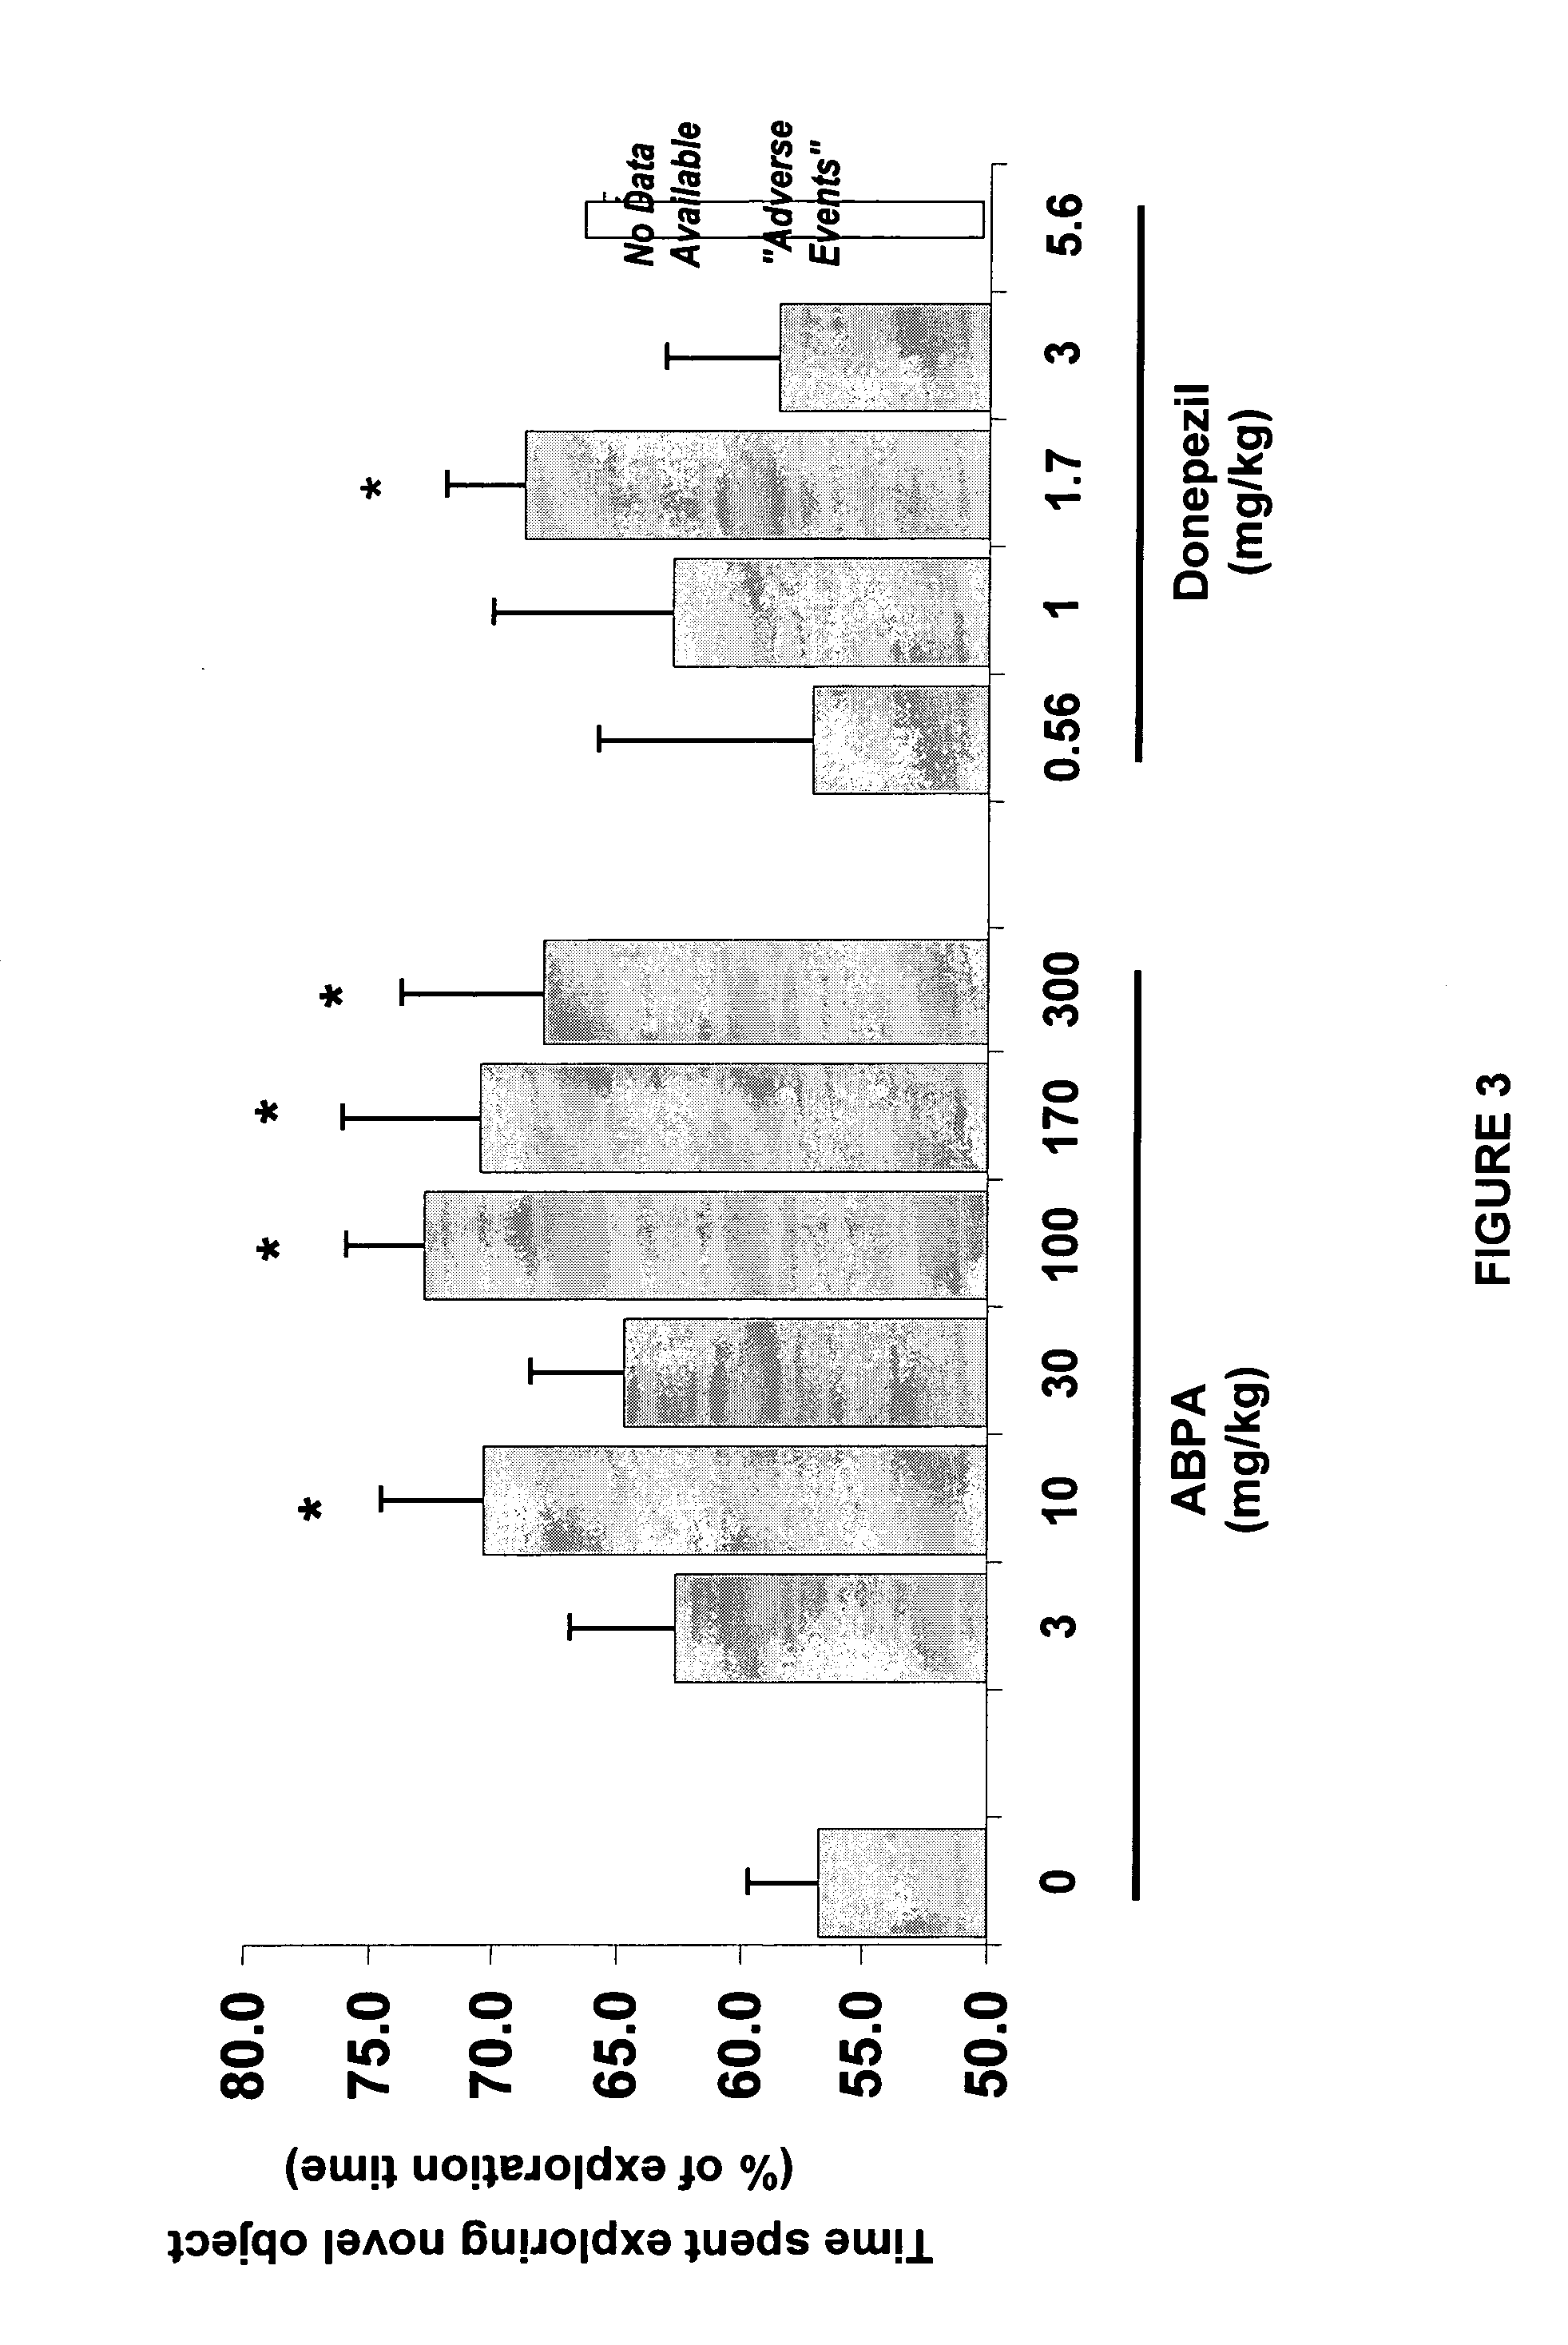 Method for improving cognitive function by co-administration of a GABAB receptor antagonist and an acetylcholinesterase inhibitor